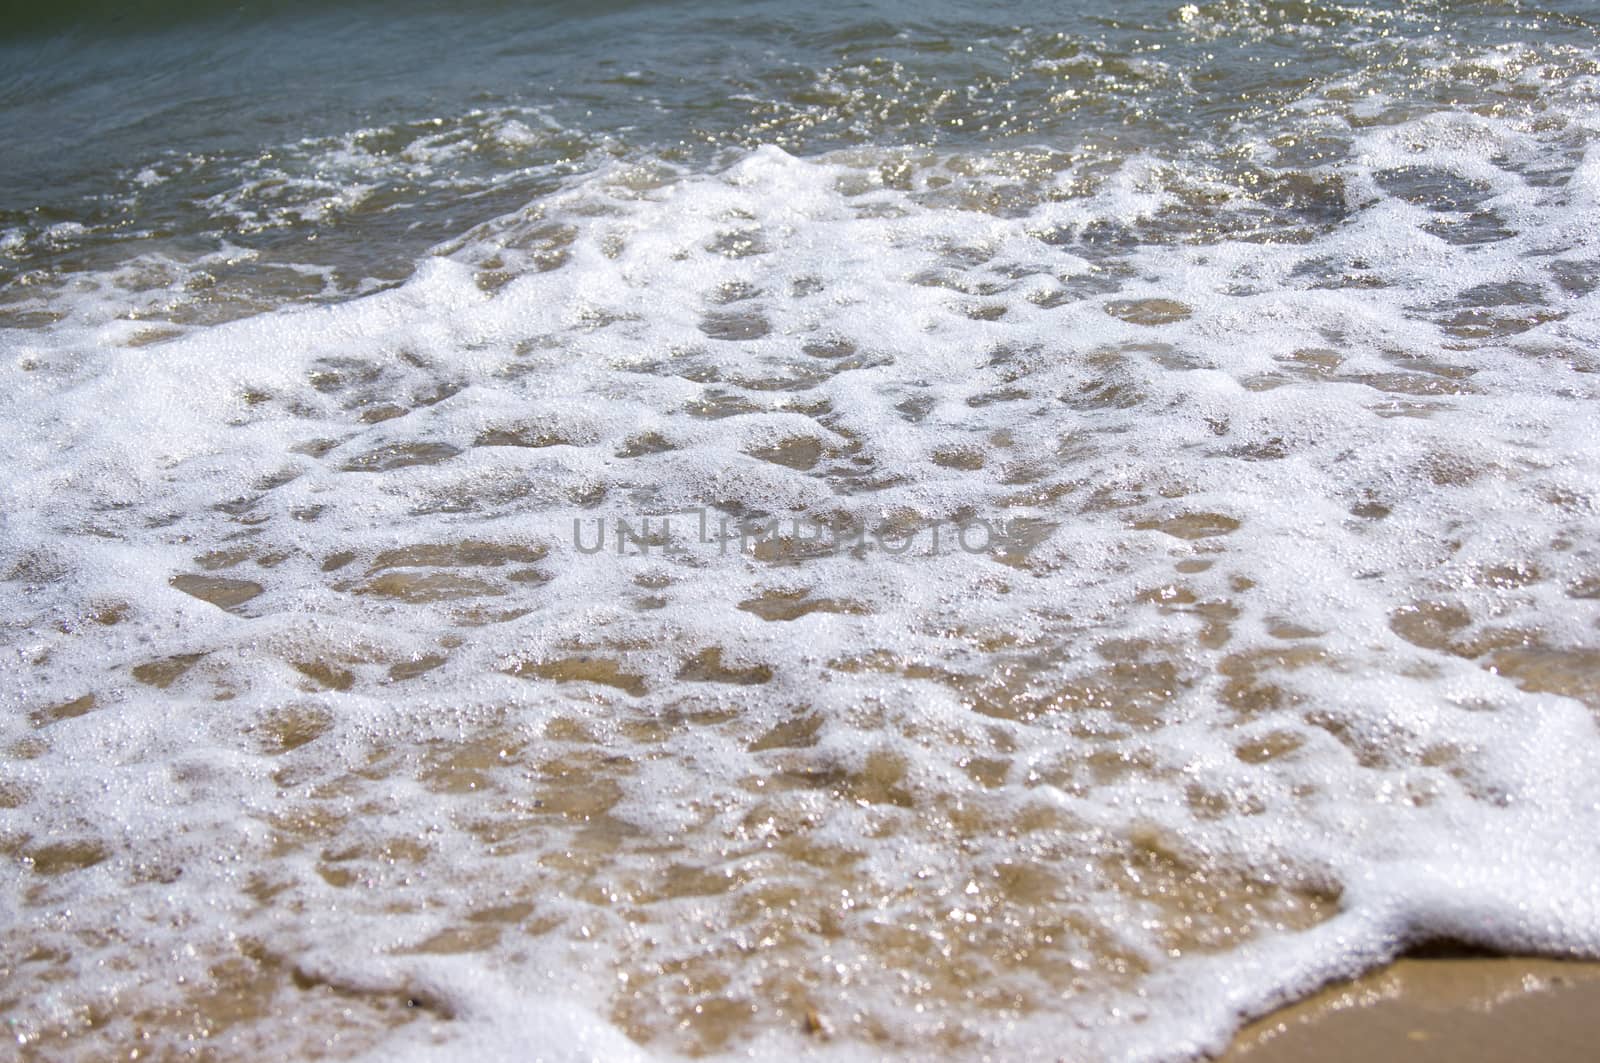 Sand beach and wave. For your commercial and editorial use.